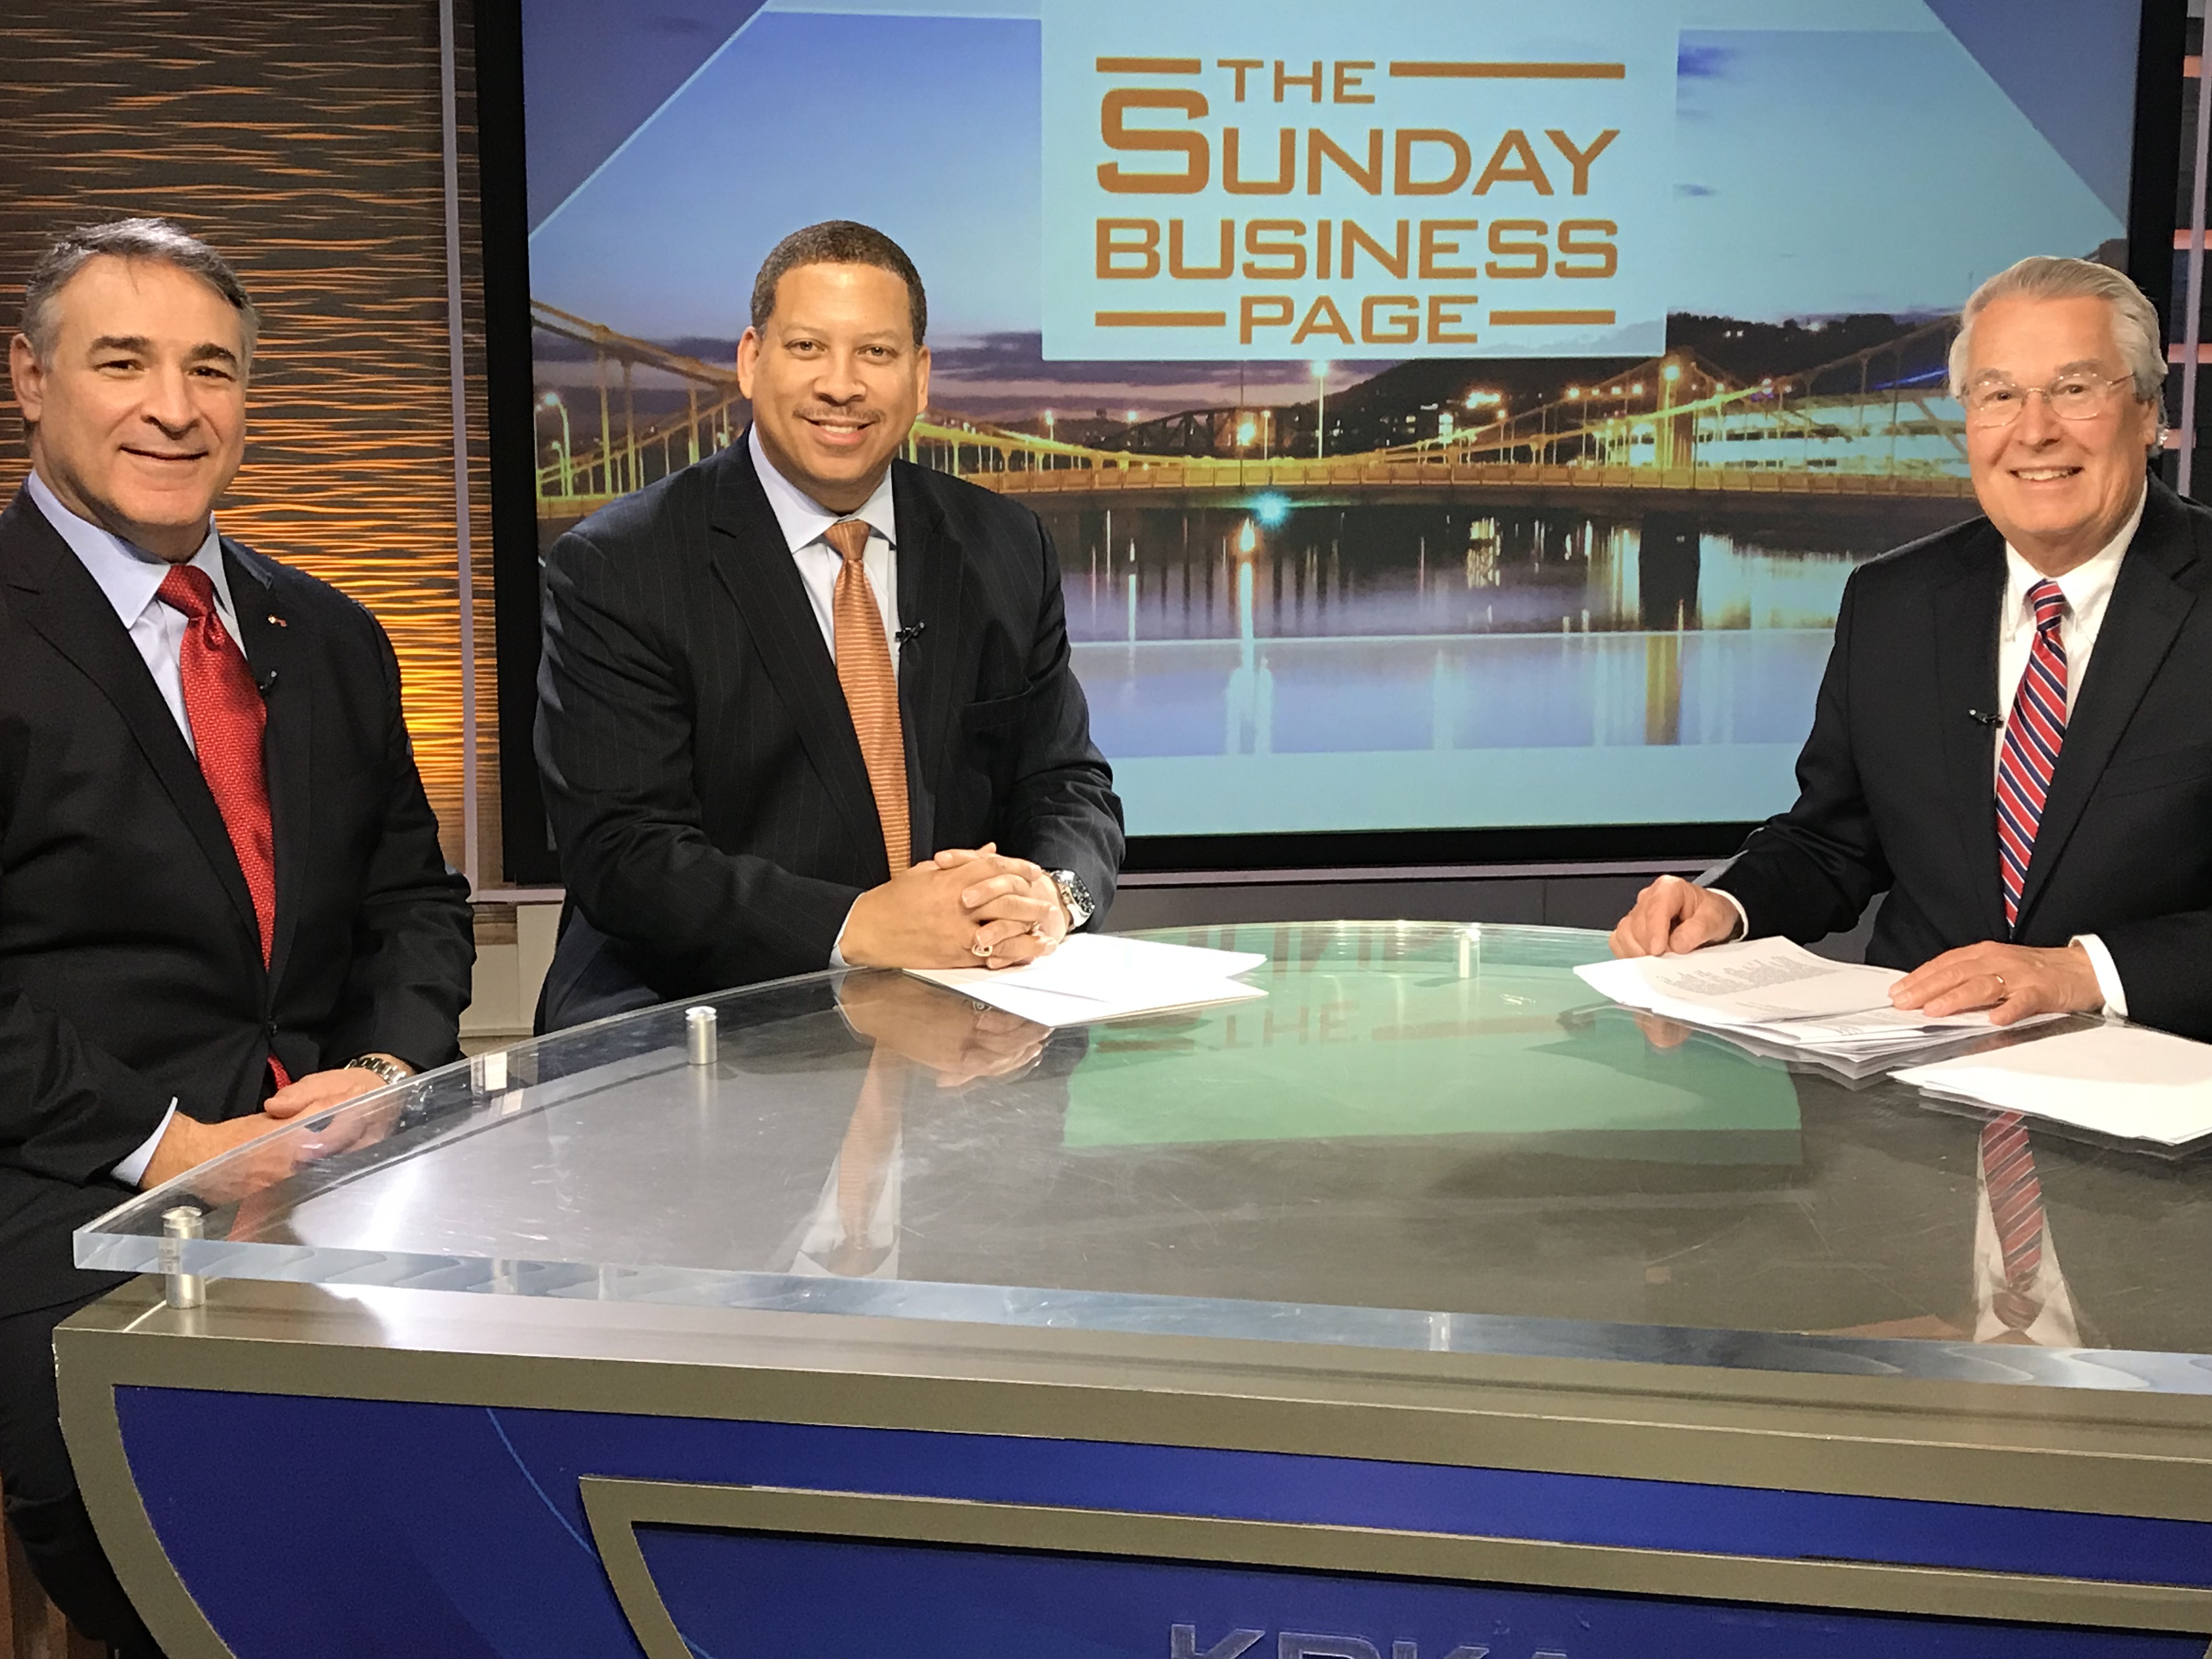 Presley Gillespie and KeyBank’s Todd Moules on KDKA-TV’s Sunday Business Page